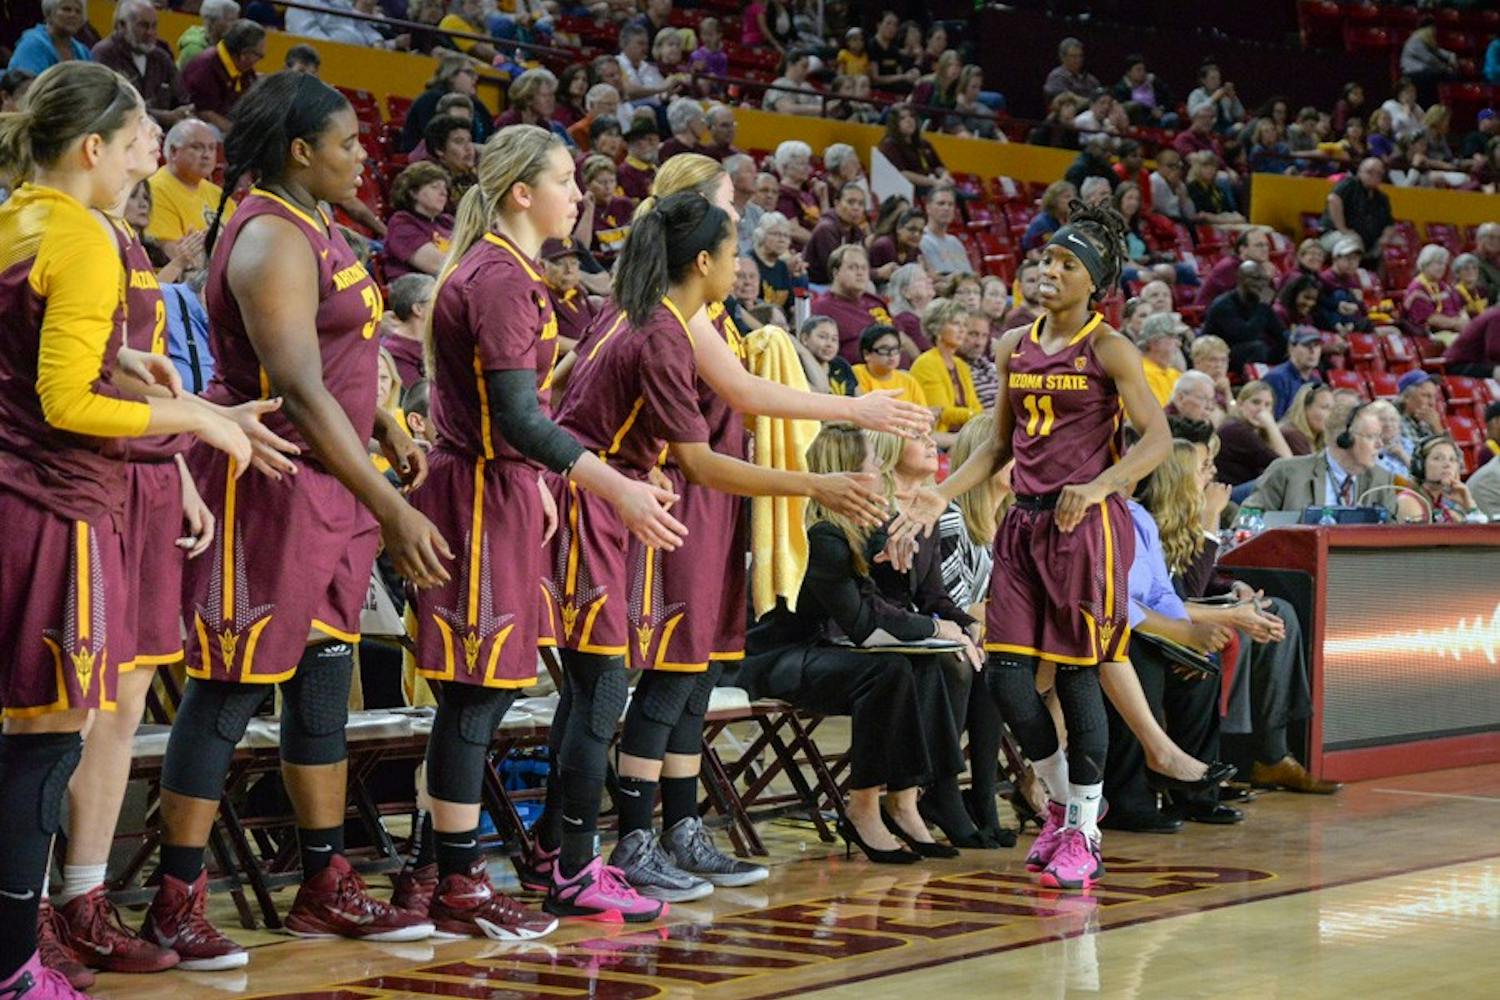 Junior guard Peace Amukamara is greeted by her teammates as she returns to the bench during Friday's game. The Sun Devils would go on to win the game 45-42 over the Utes. on Feb. 27, 2015 at the Wells Fargo Arena in Tempe. (J. Bauer-Leffler/The State Press)